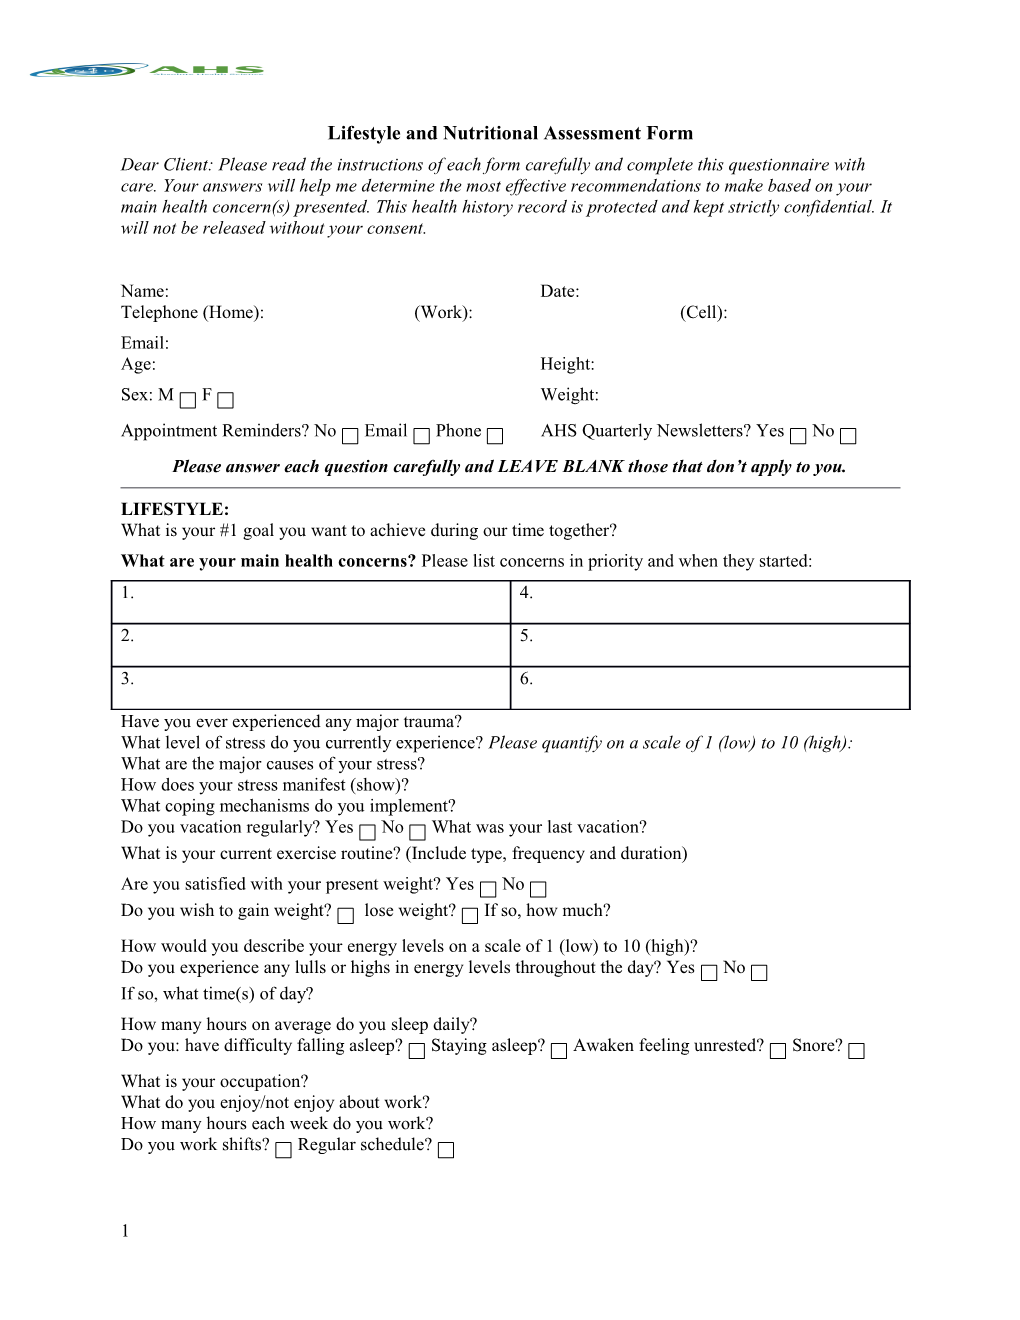 Lifestyle and Nutritional Assessment Form